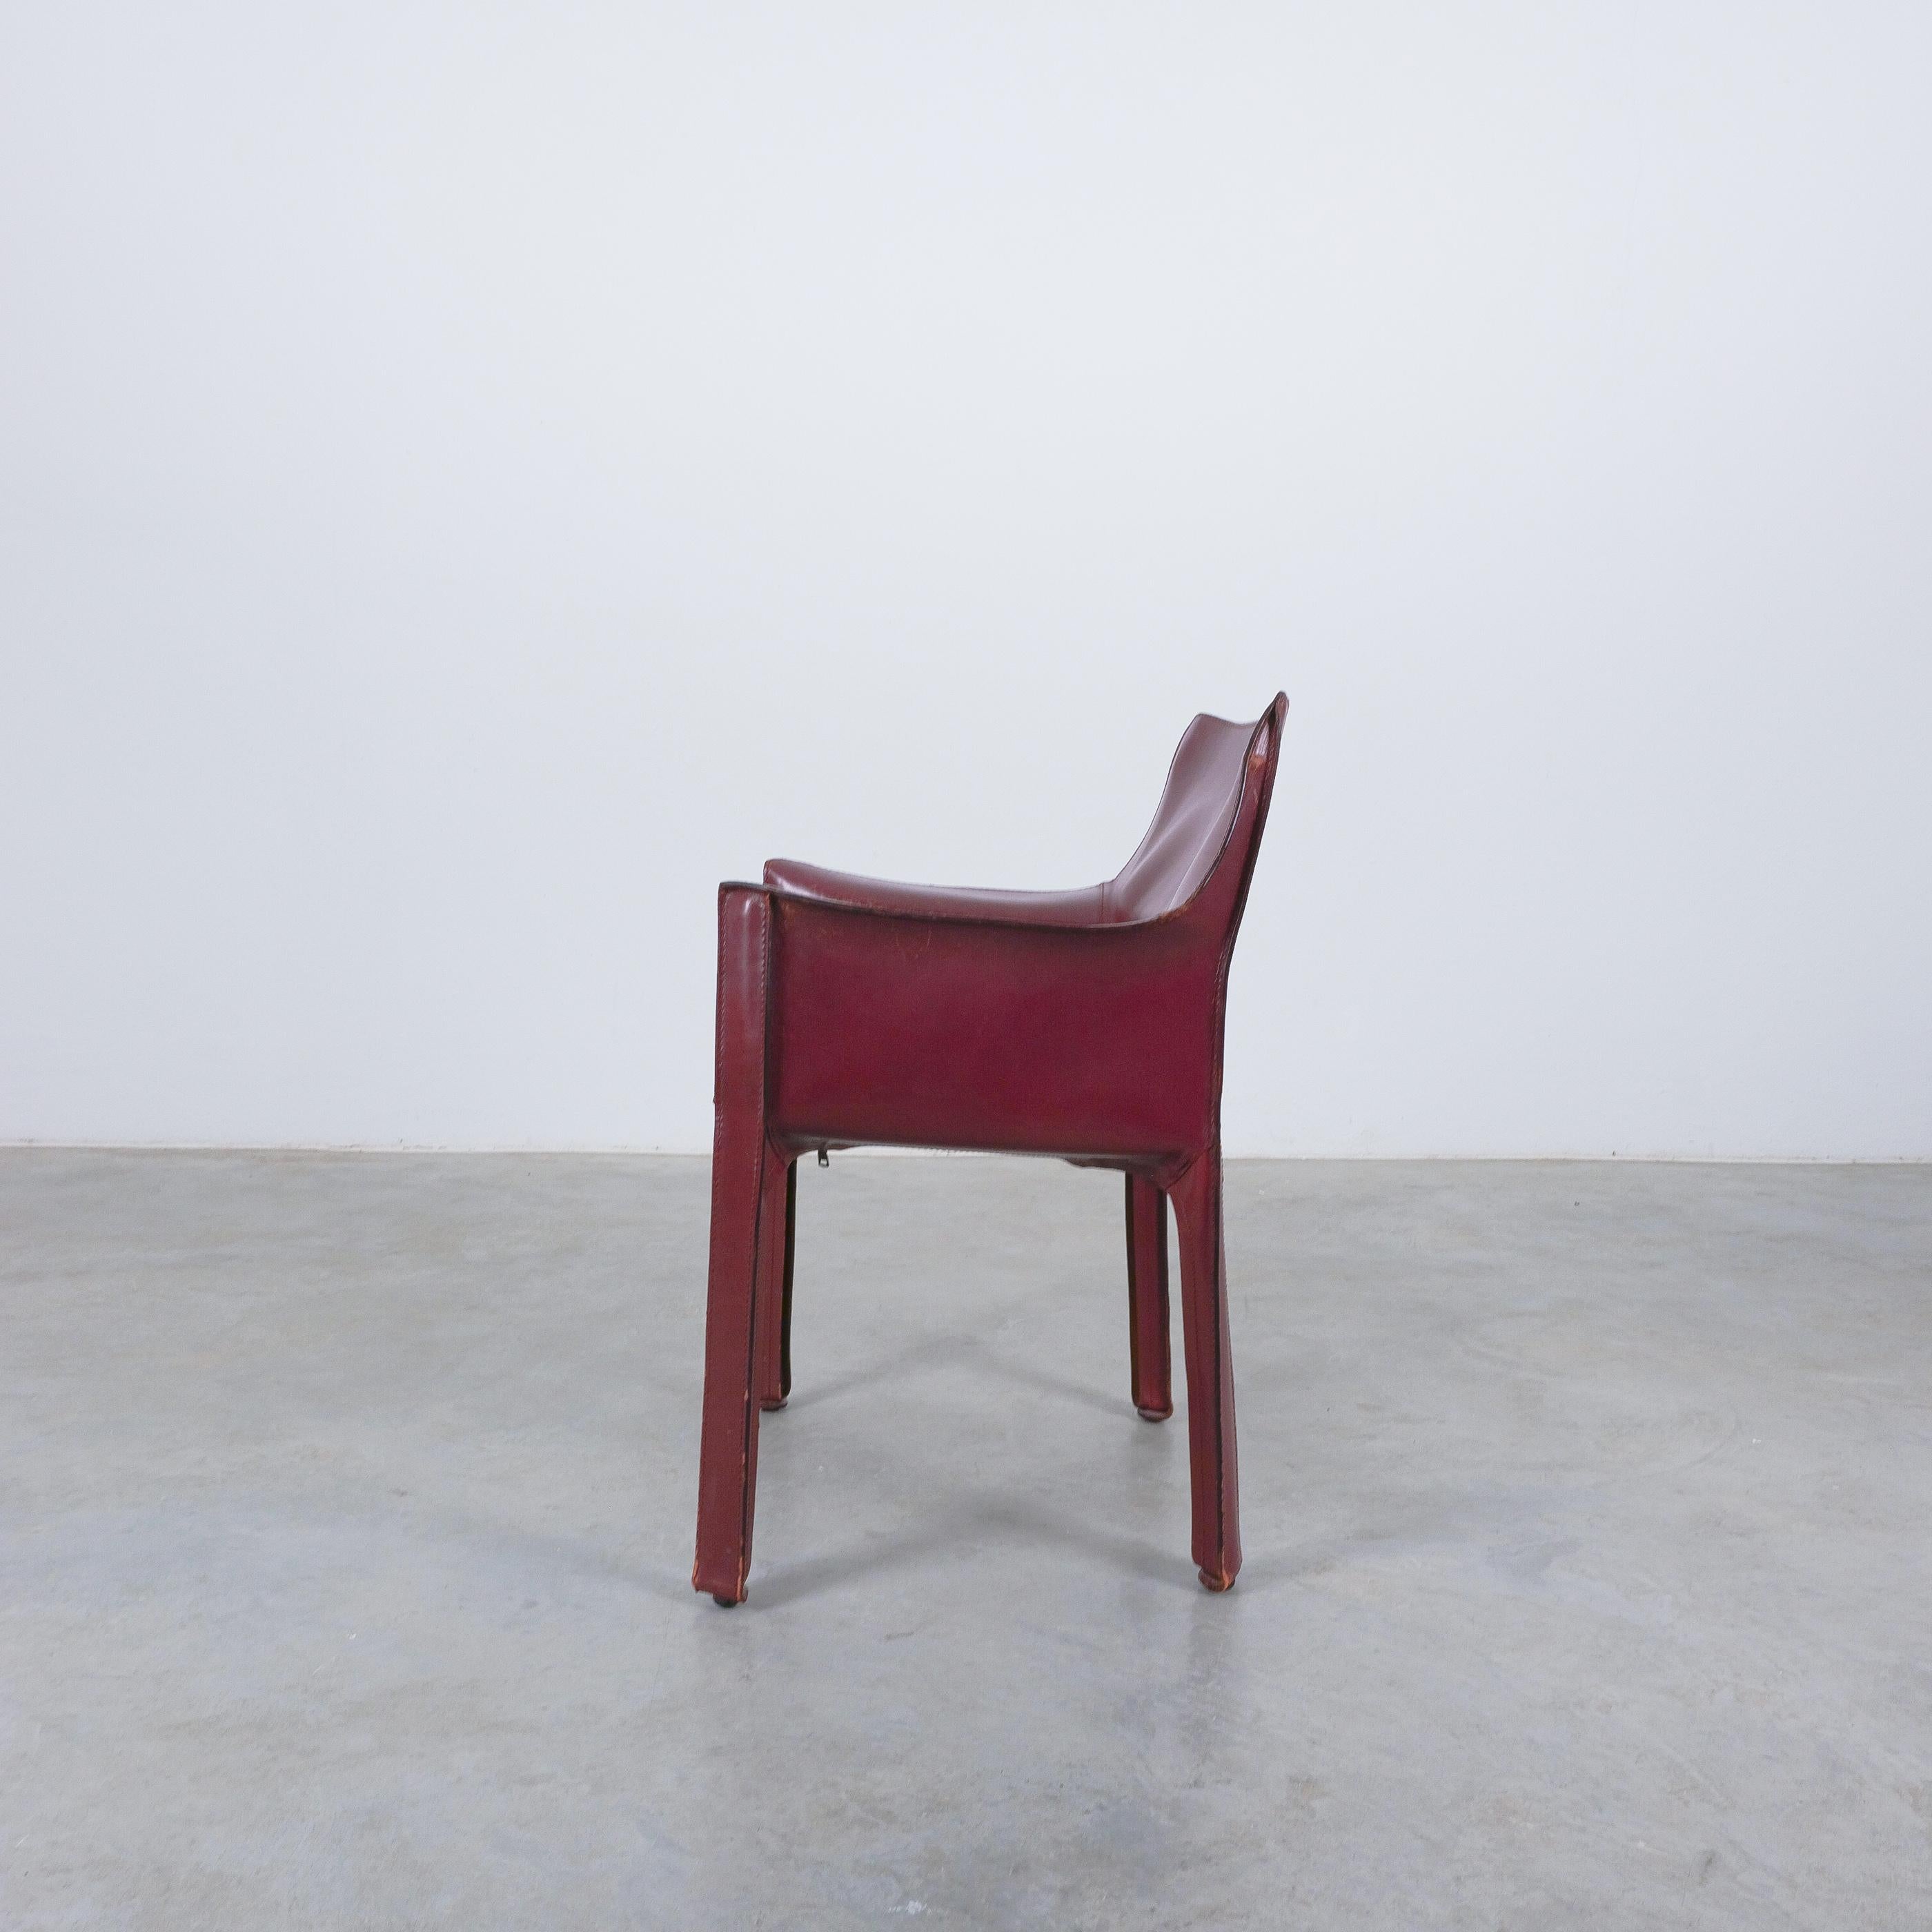 Mario Bellini Cassina Cab 413 Burgundy Red Leather Dining Chairs, 1980 For Sale 2